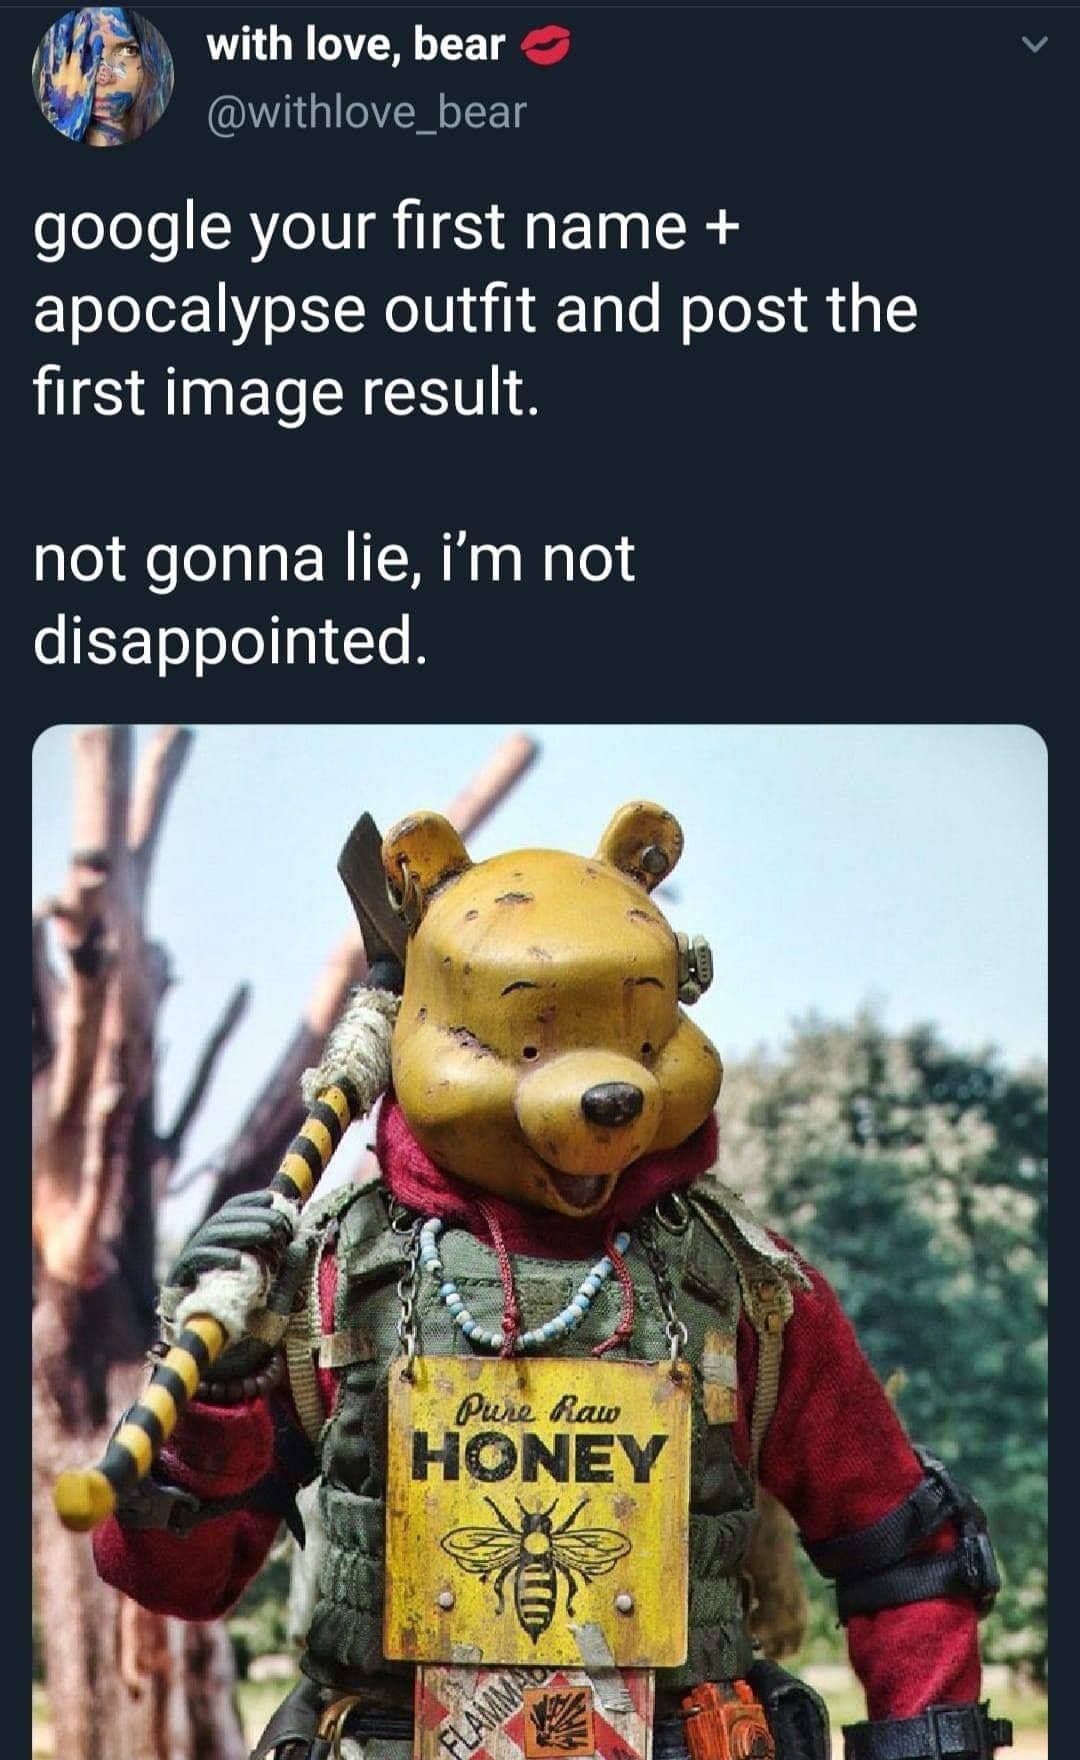 twitter - google your first name and apocalypse outfit and post the first image result. not gonna lie, i'm not disappointed - winnie the pooh in apocalypse outfit